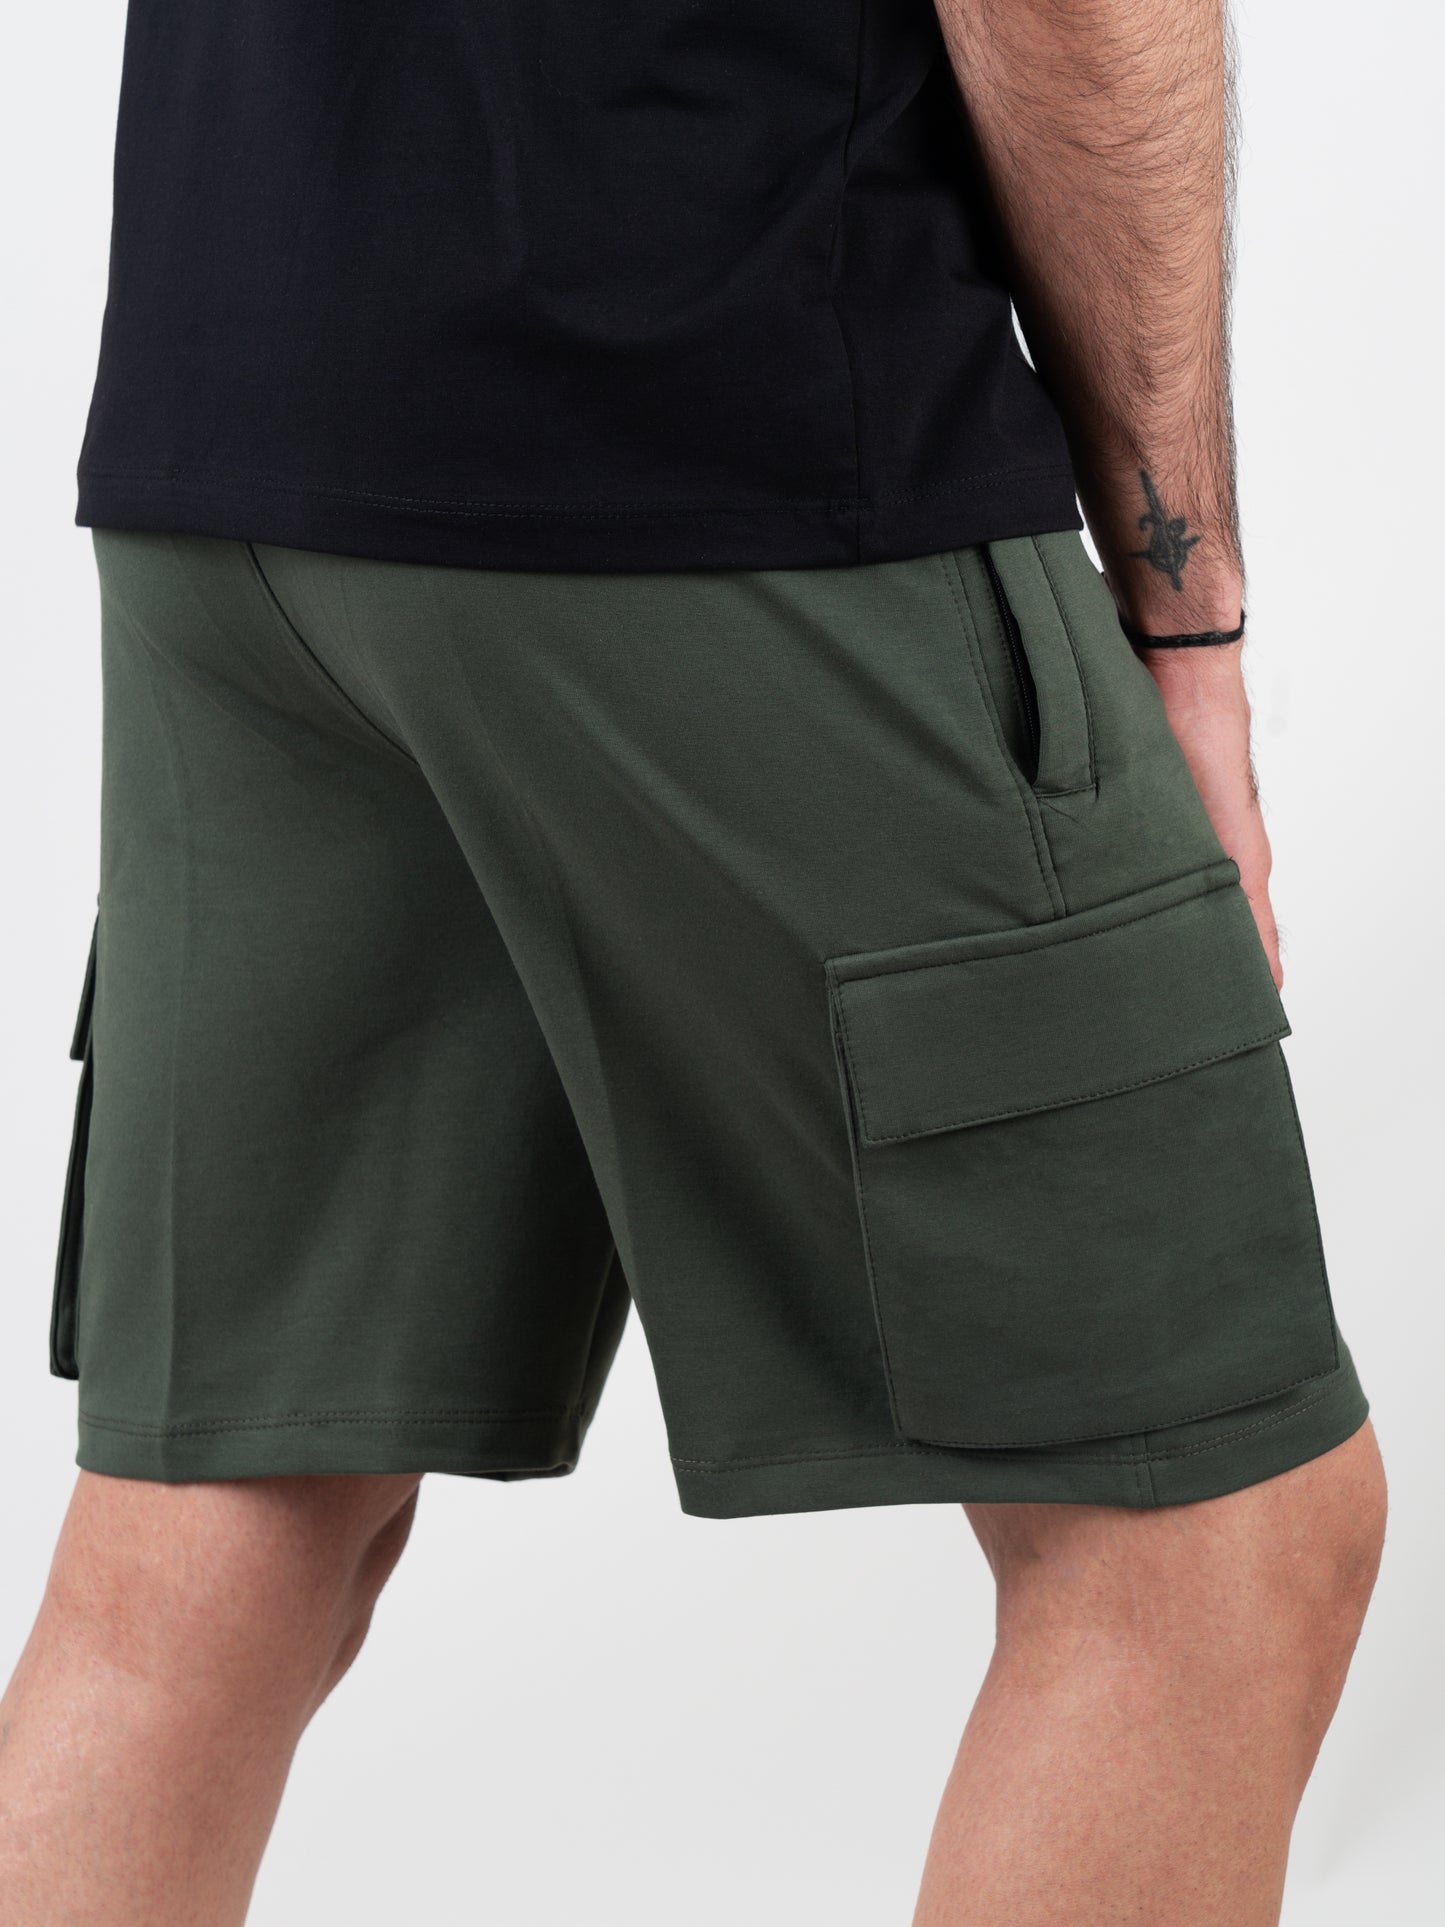 Fearless Cargo Shorts For Men - Olive Green